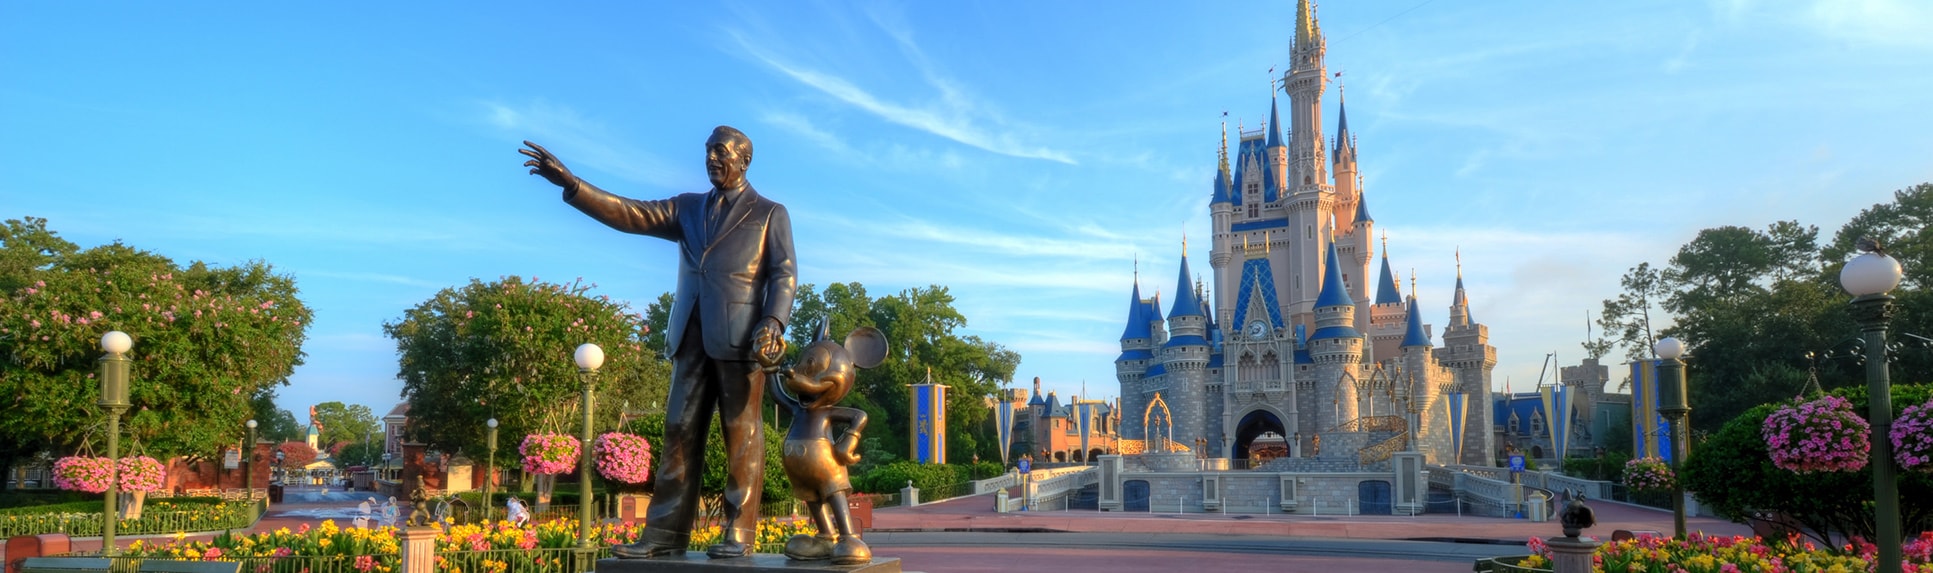 A statue of Mickey Mouse and Walt Disney holding hands in front of Cinderella Castle at Magic Kingdom park